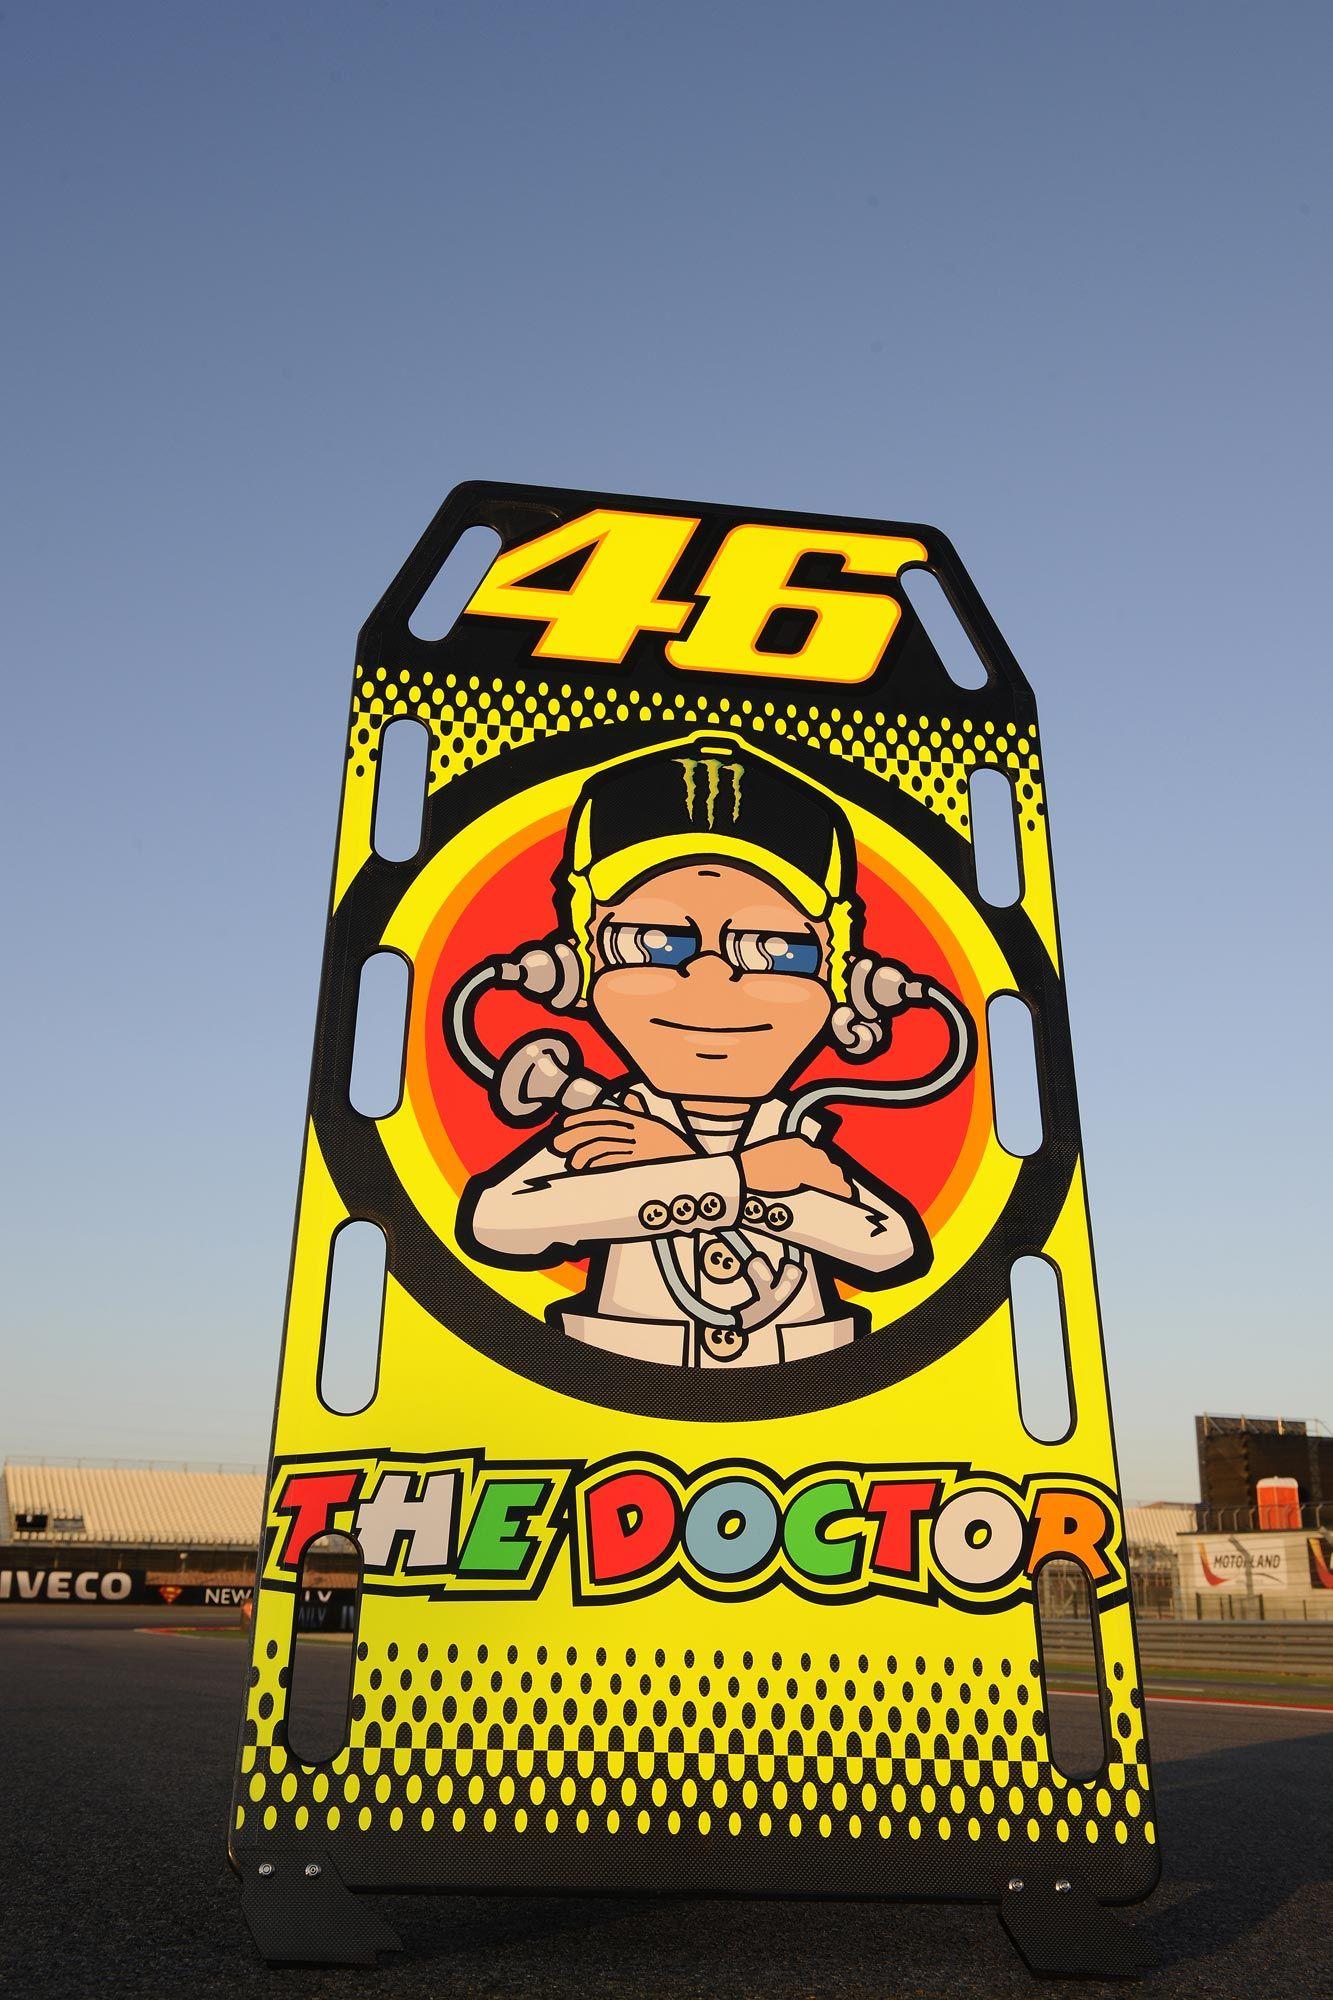 image about Valentino Rossi VR46. Cartoon